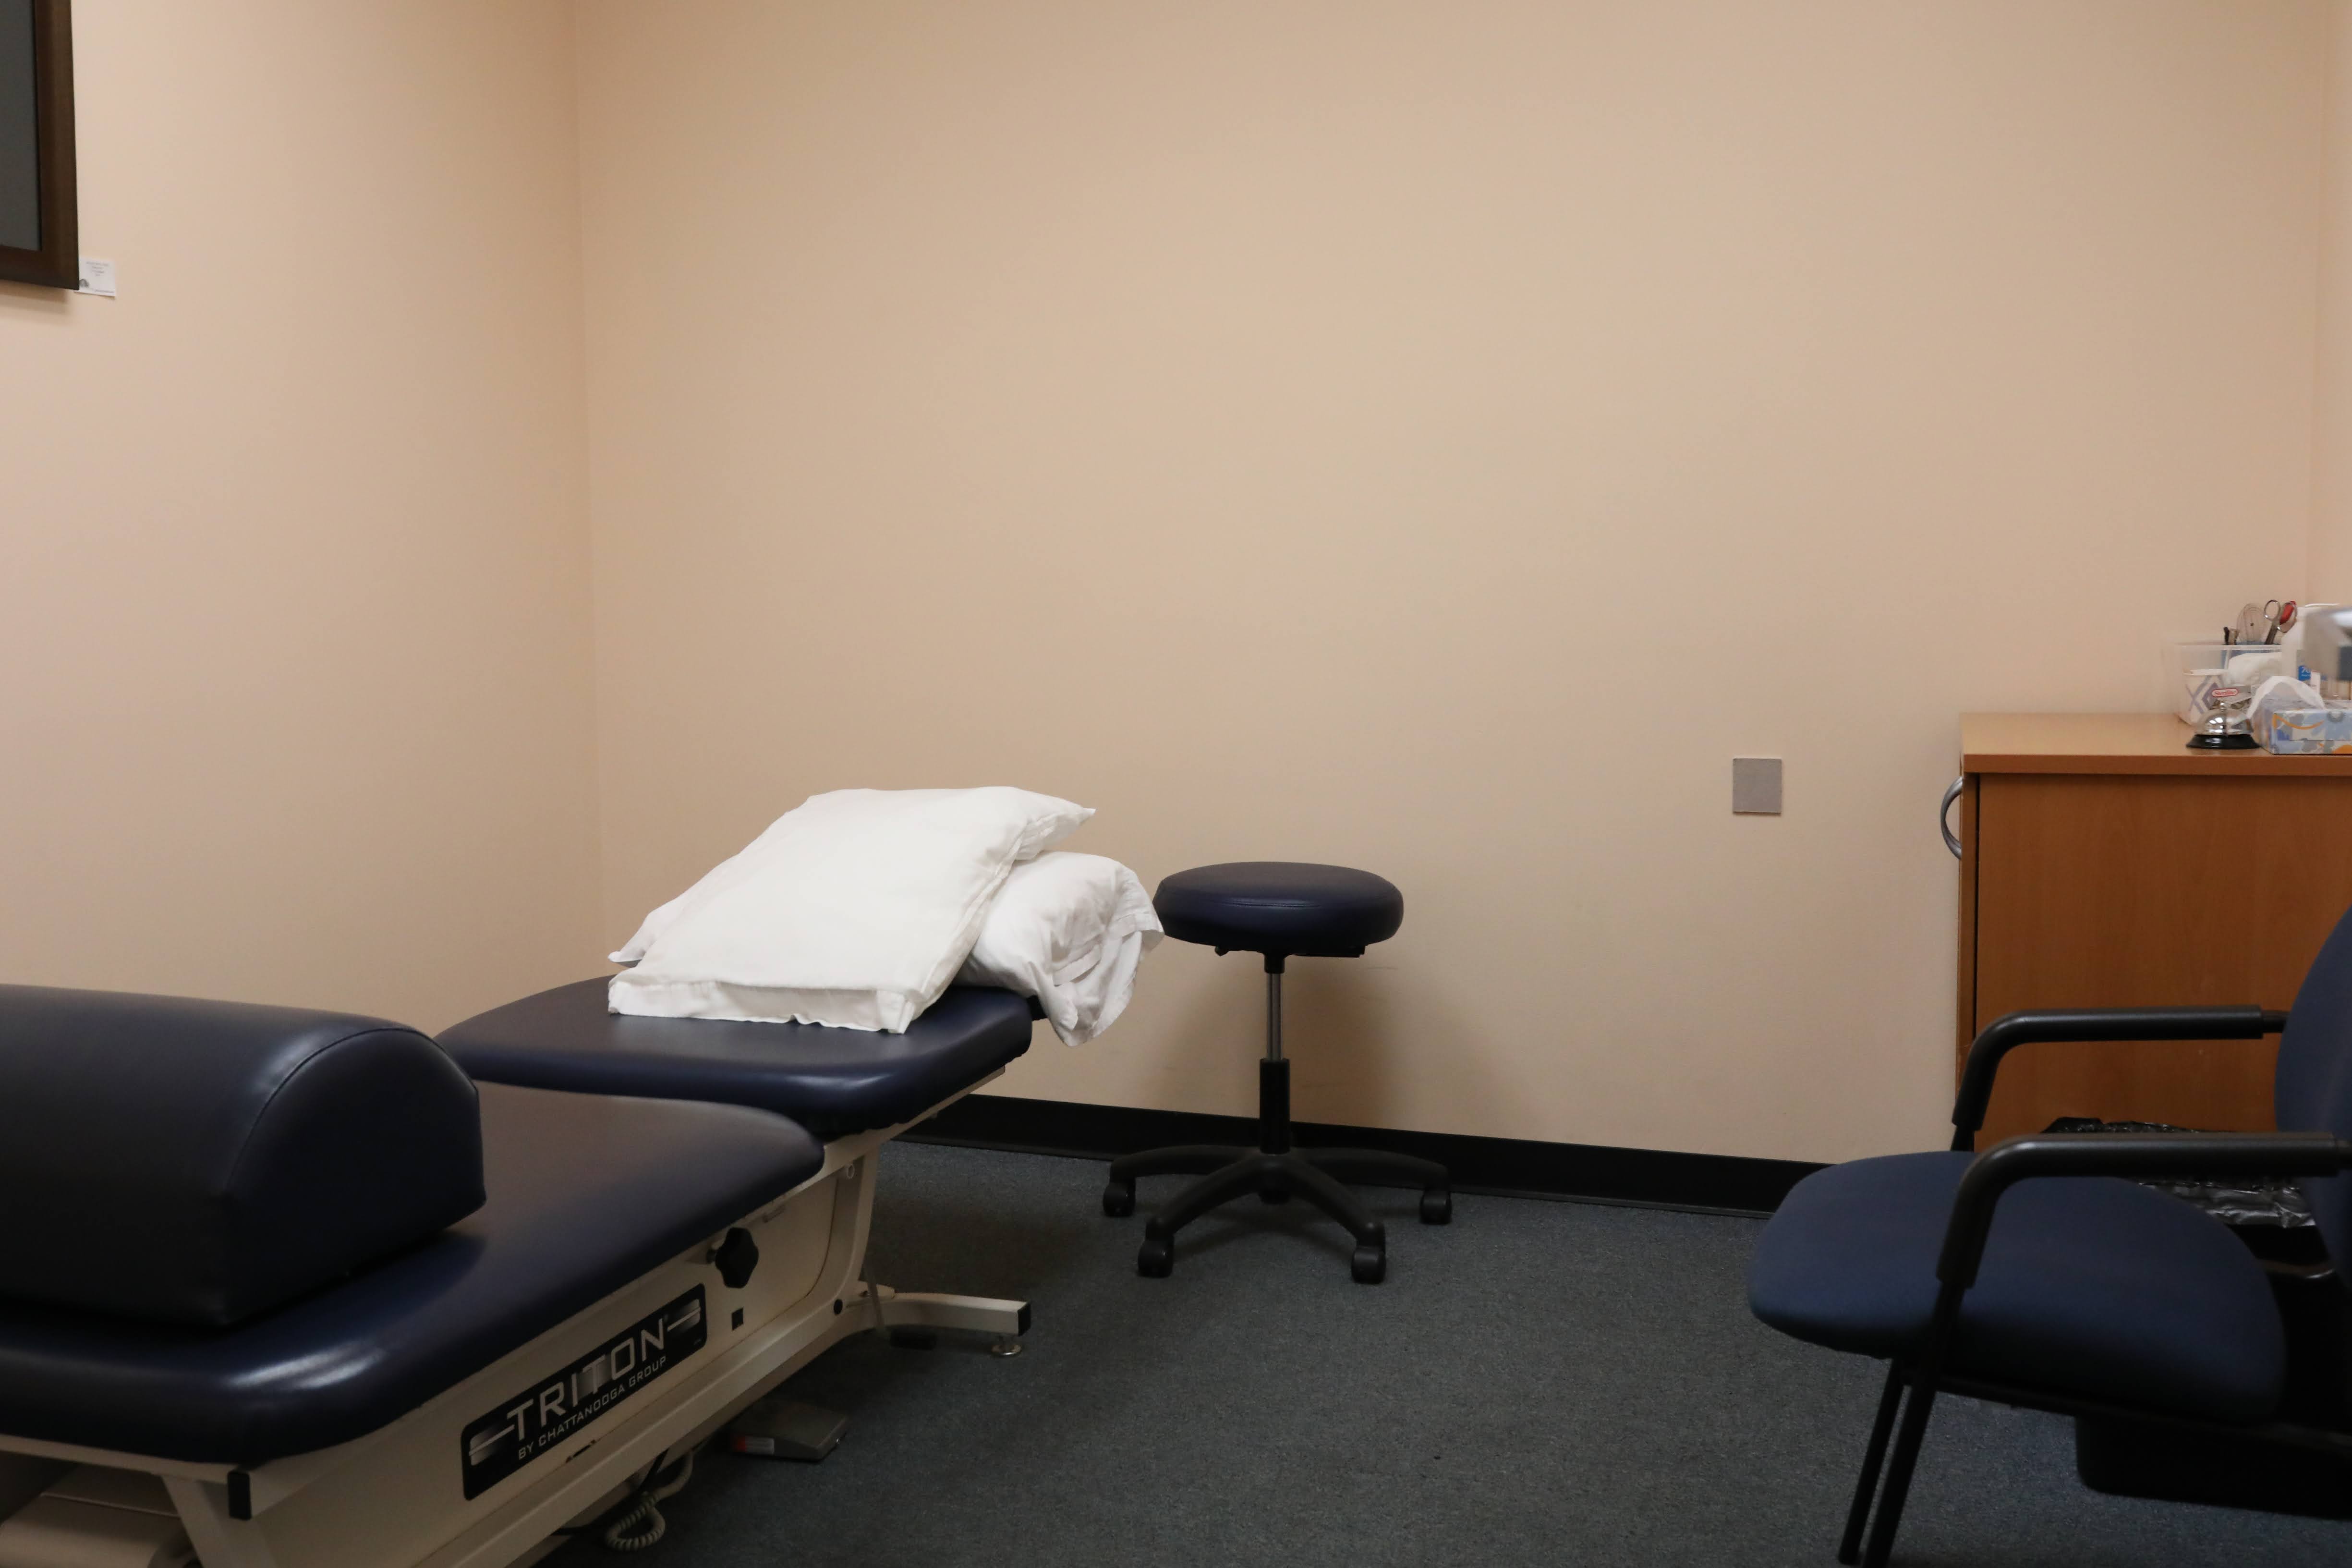 Summit Rehabilitation physical therapy clinic located at
3719 88th St NE in
Marysville, Washington